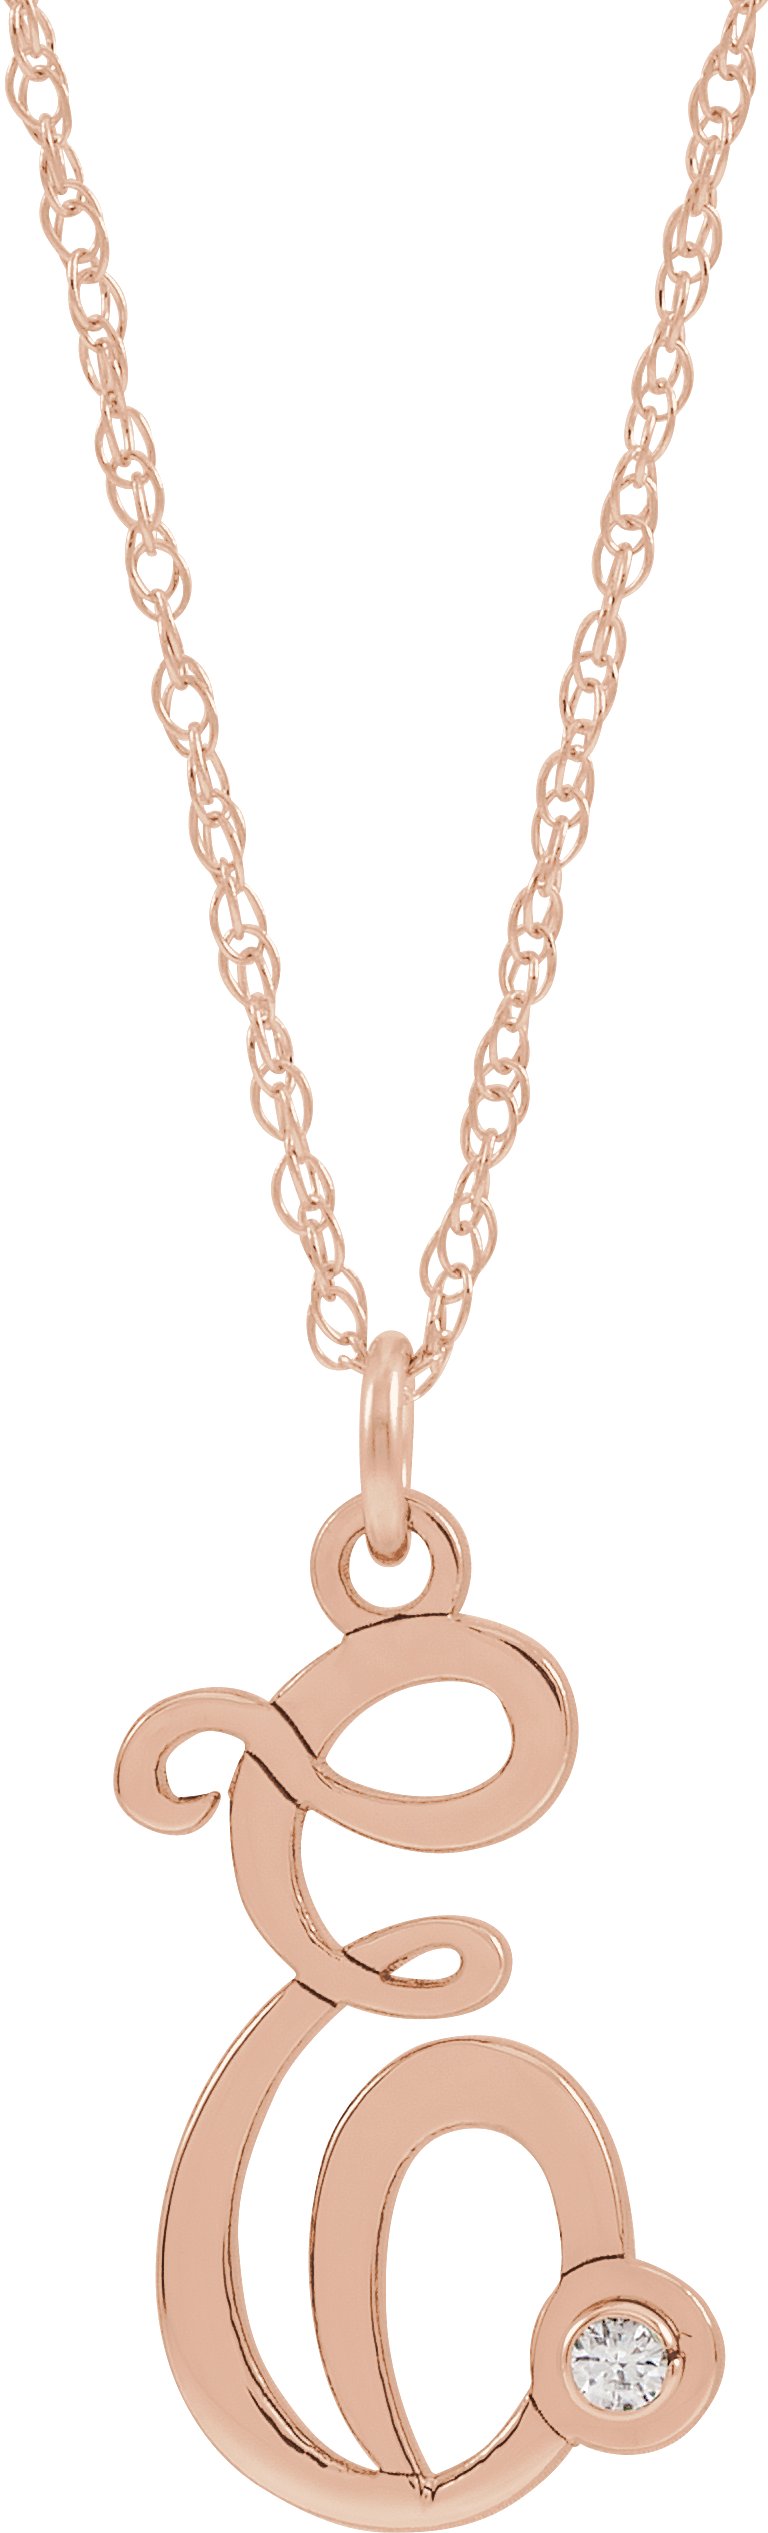 14K Rose Gold-Plated Sterling Silver .02 CT Diamond Script Initial E 16-18" Necklace